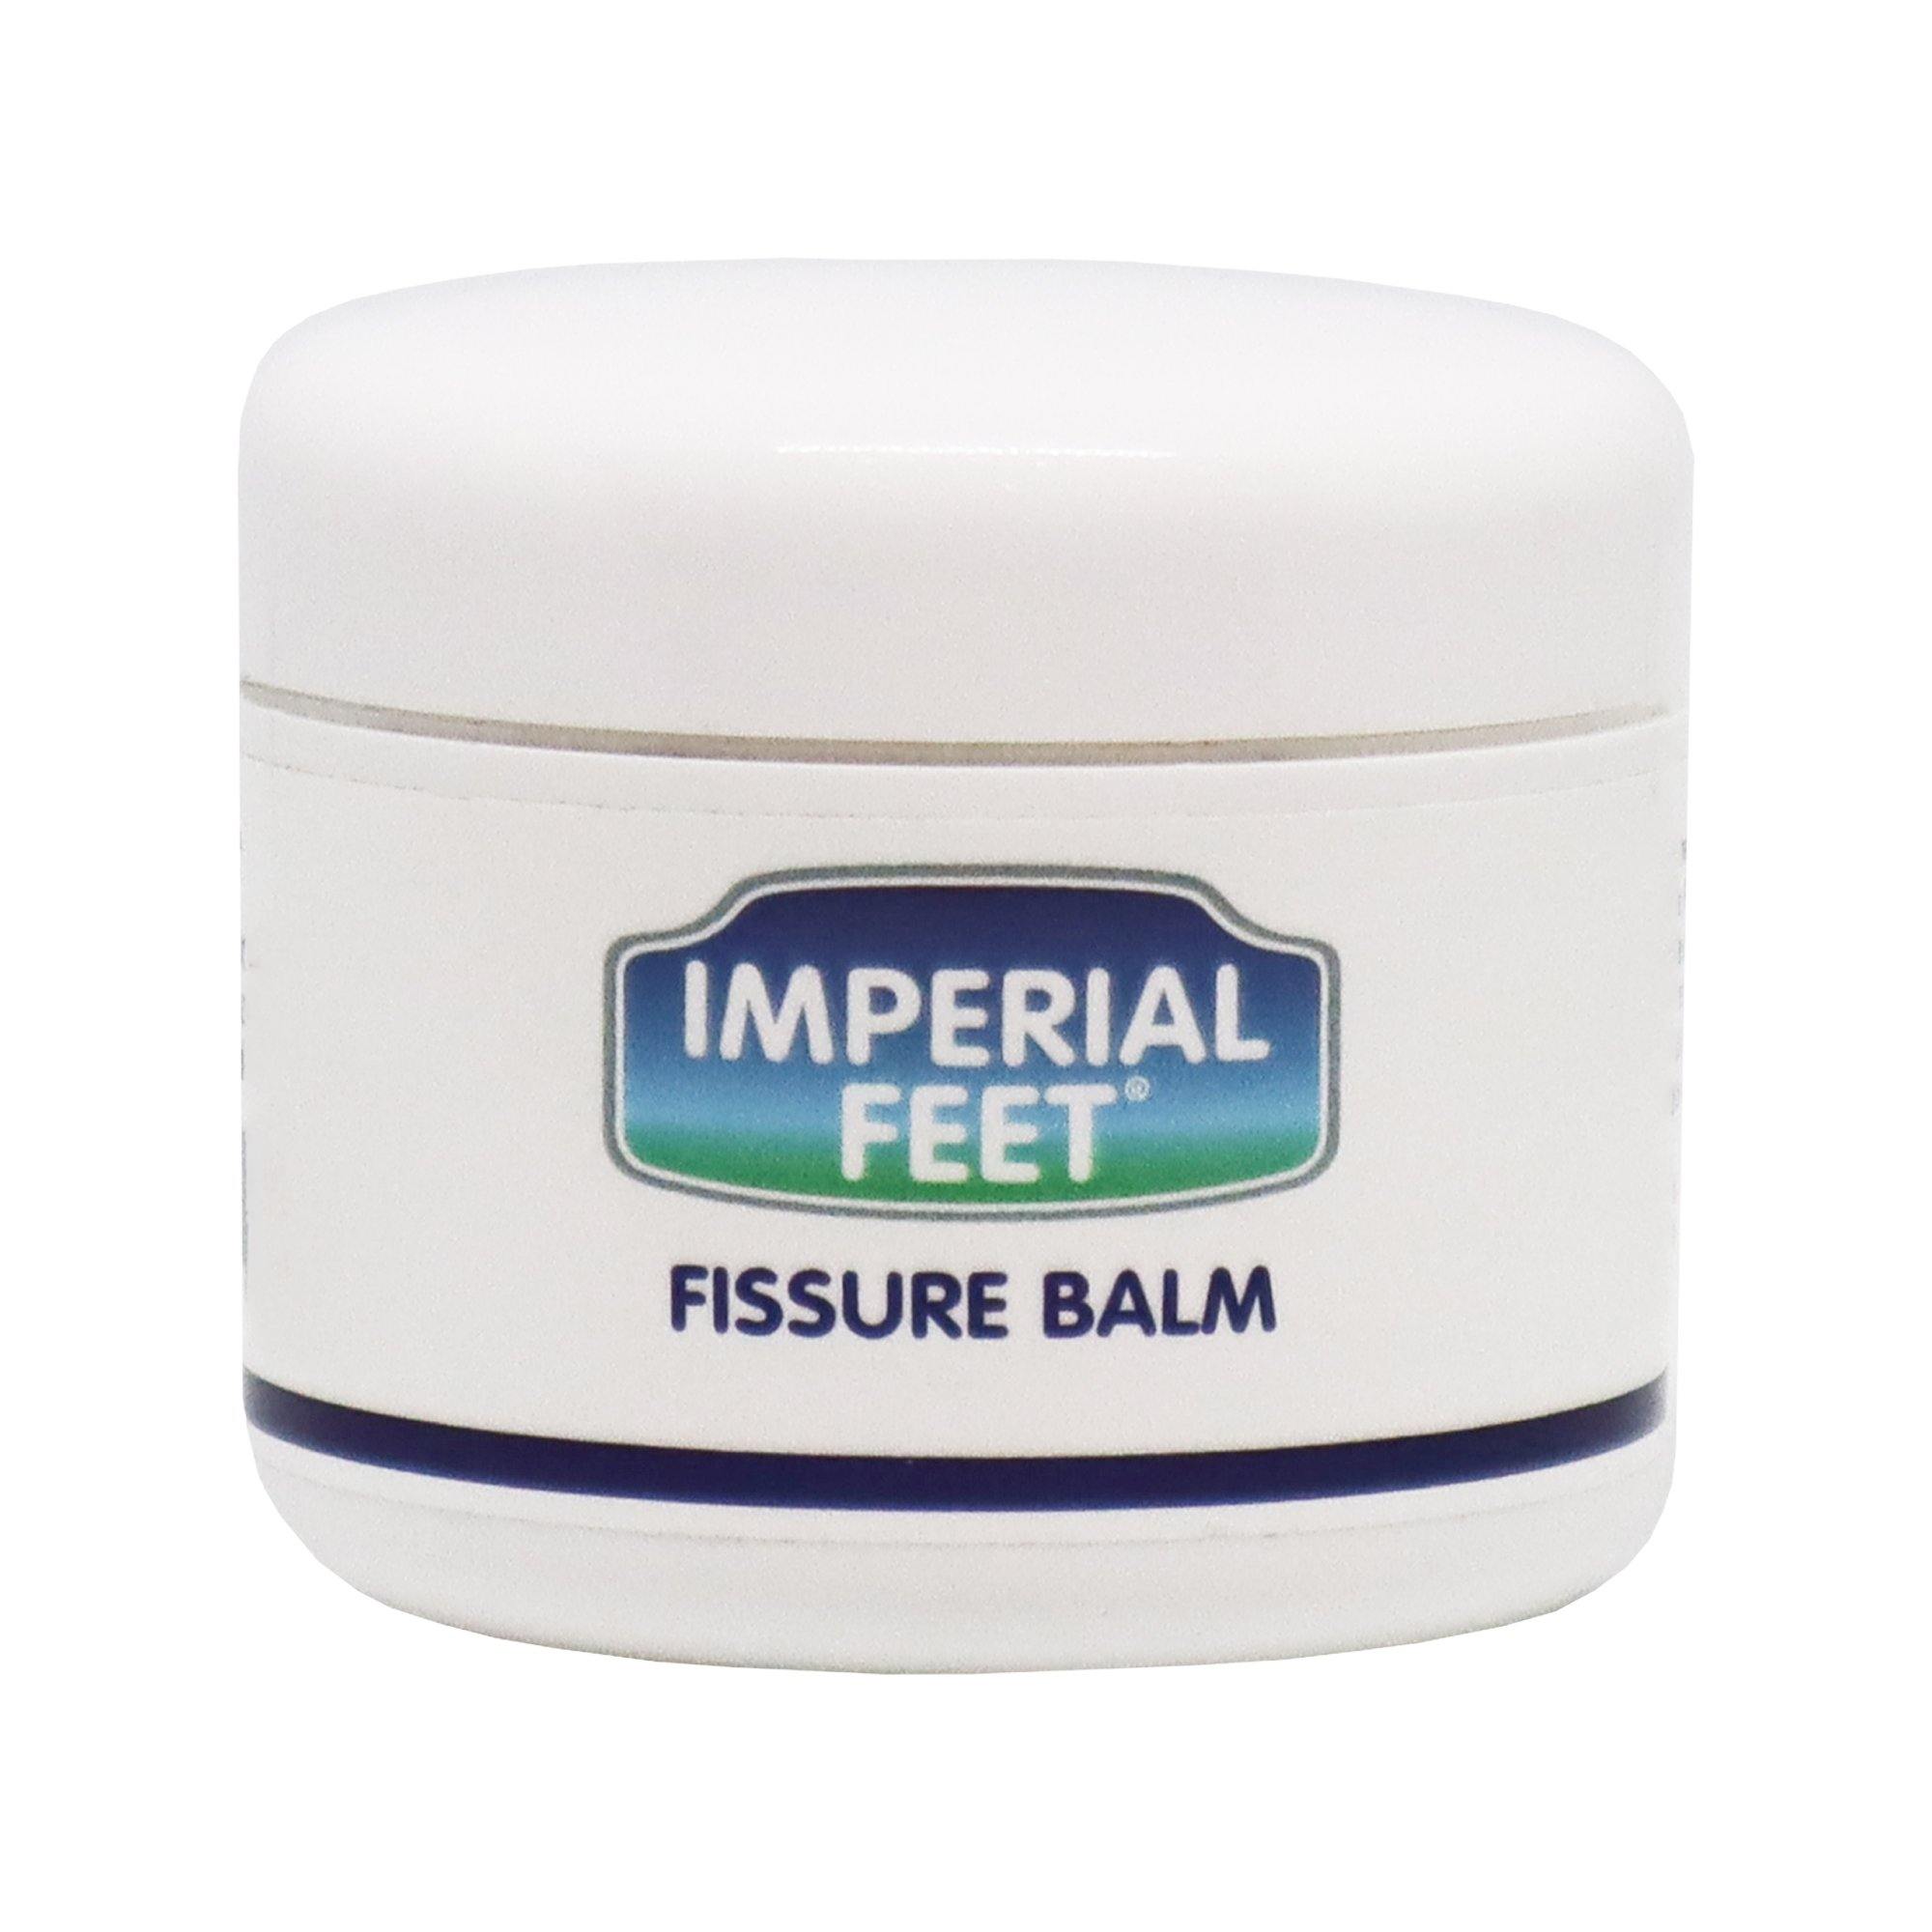 Fissure Balm - Imperial Feet - Foot care products - B2C, Best seller homepage, Dry and Cracked Feet